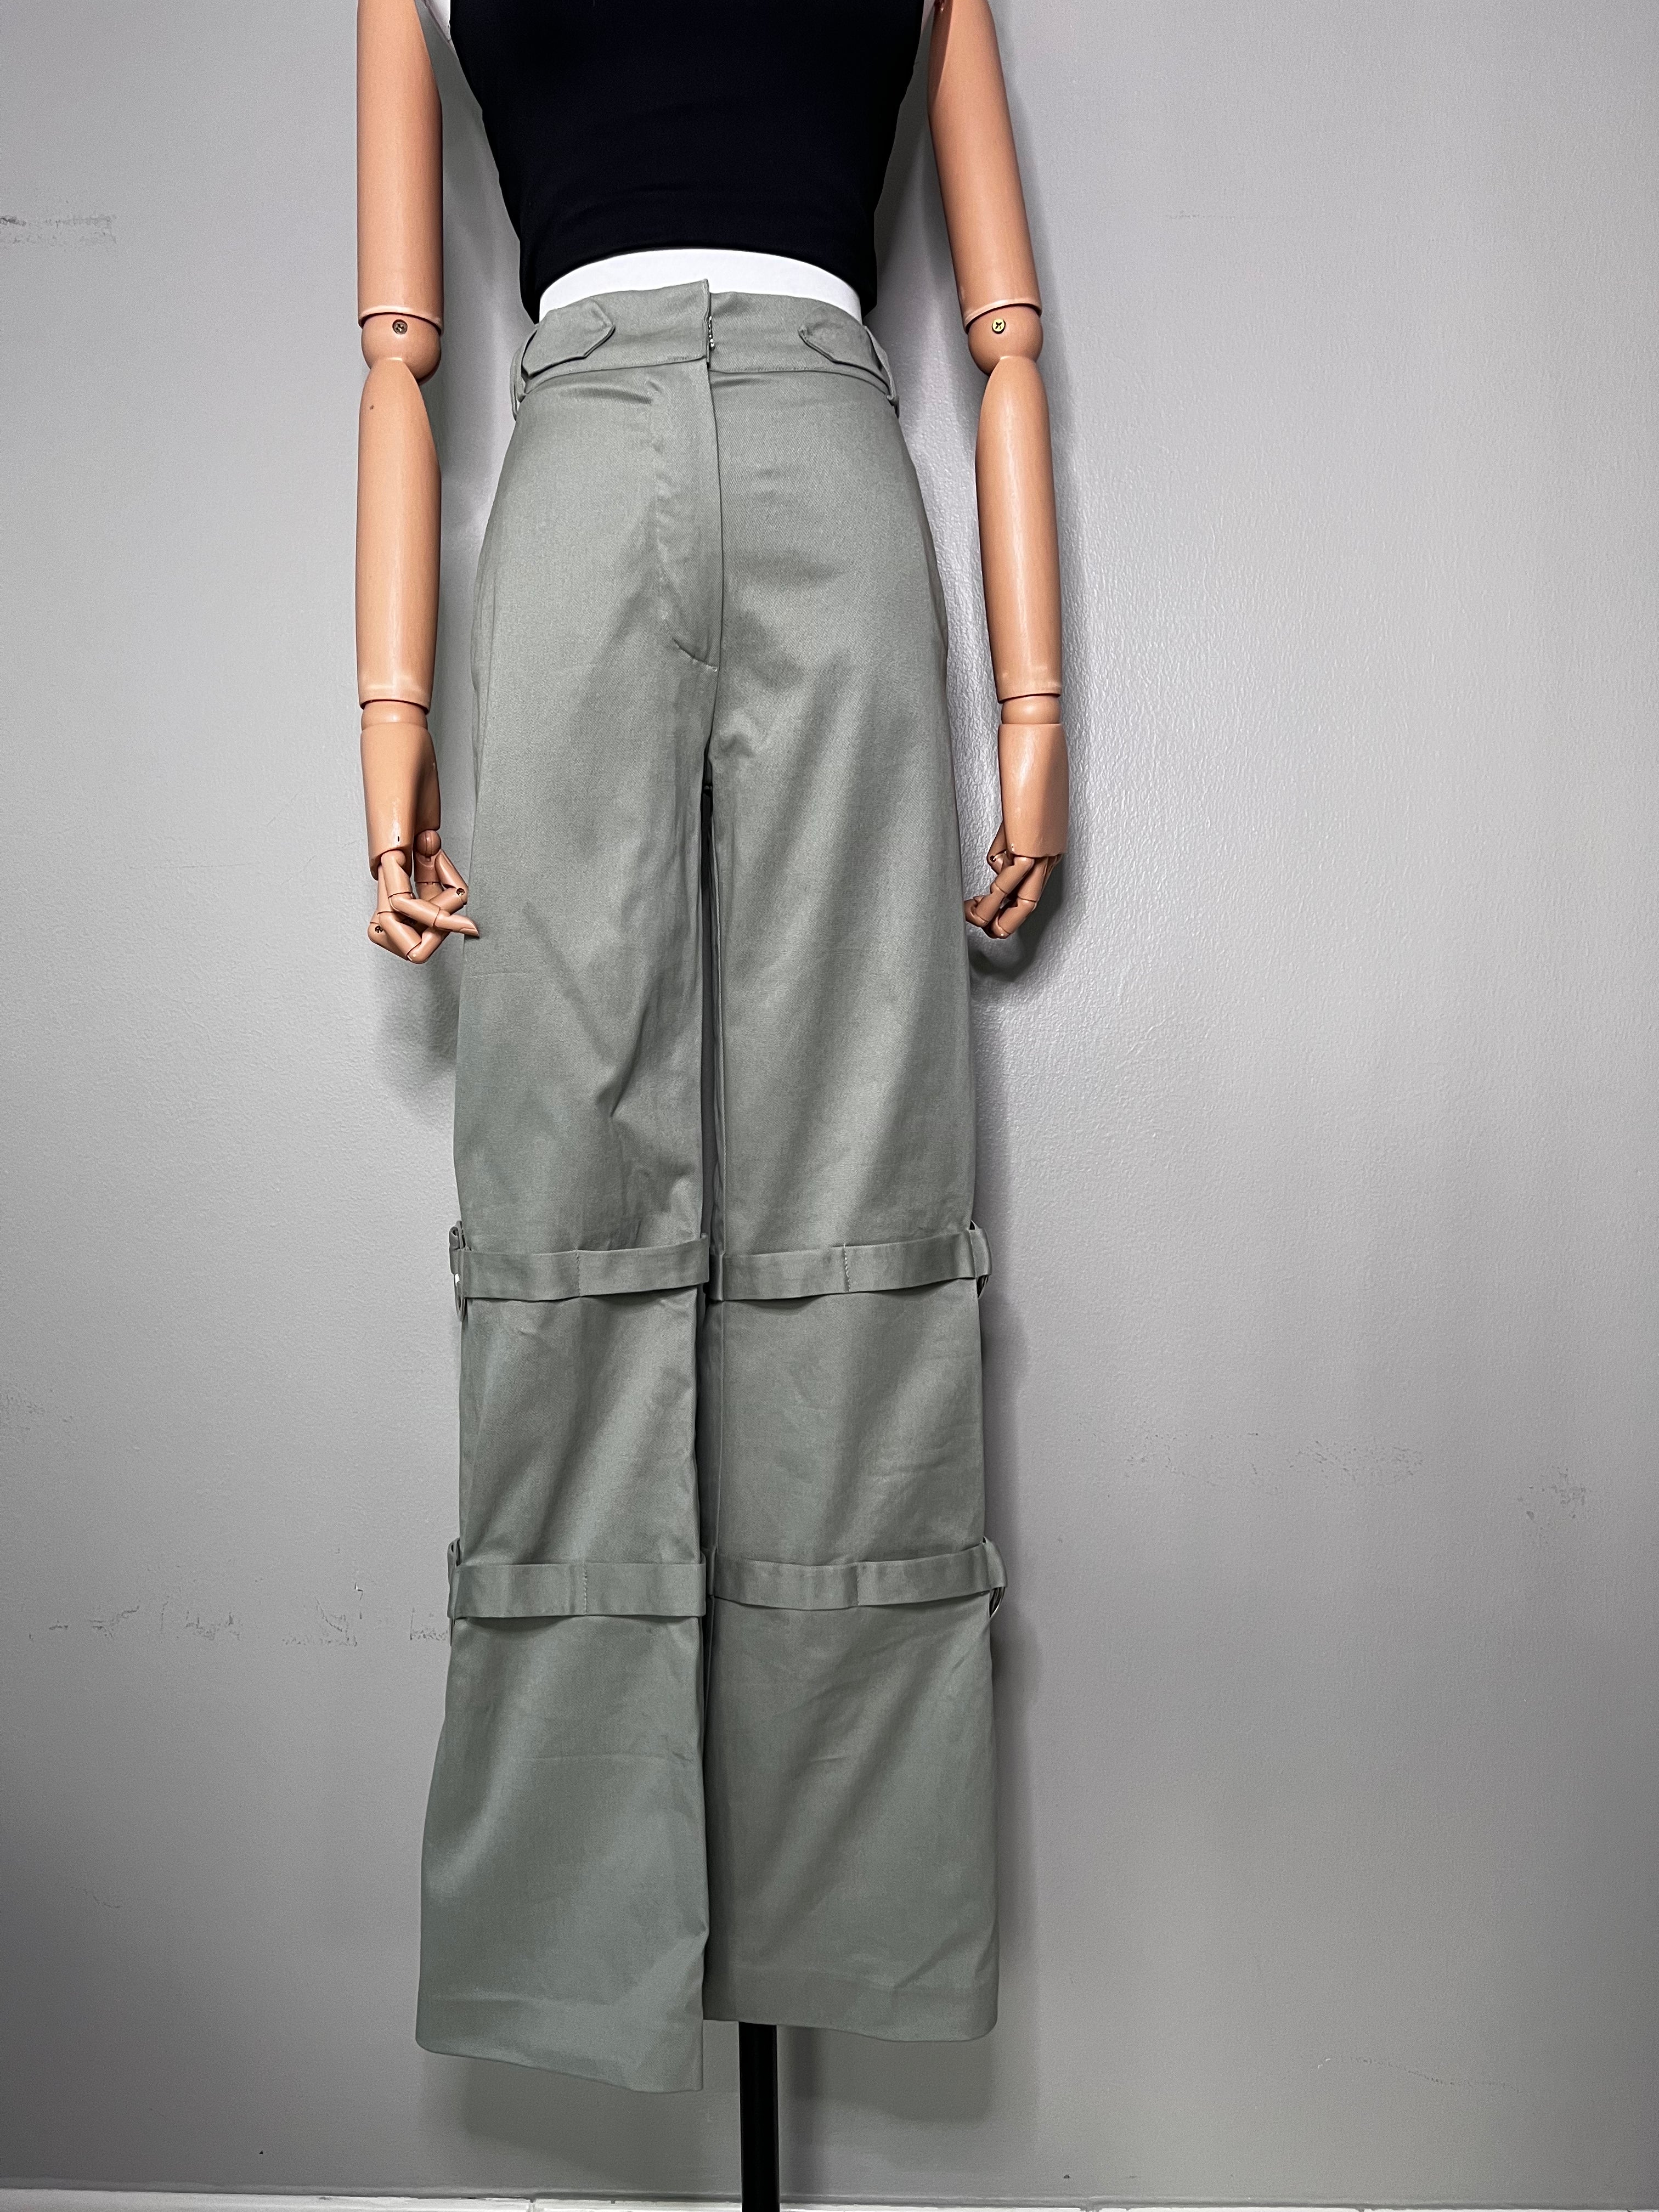 Brand new long green flared cargo pants with belt-like features all the way down the leg. - MEIDIEM